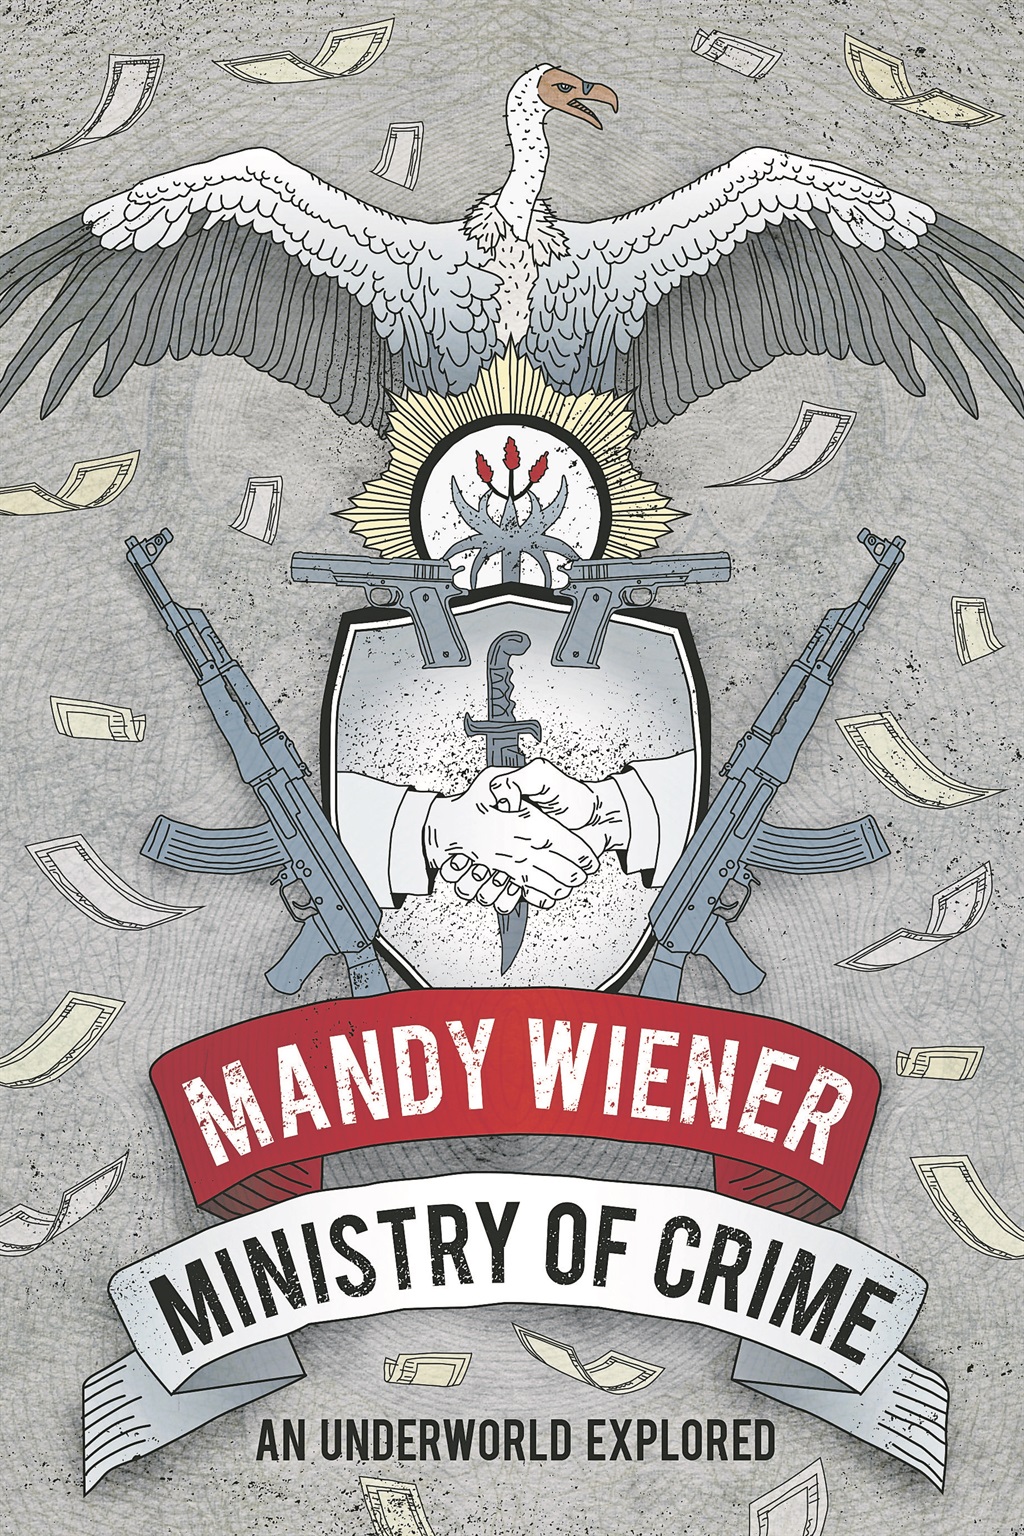 Ministy of Crime: An Underworld Explored, by Mandy WienerPHOTO: 